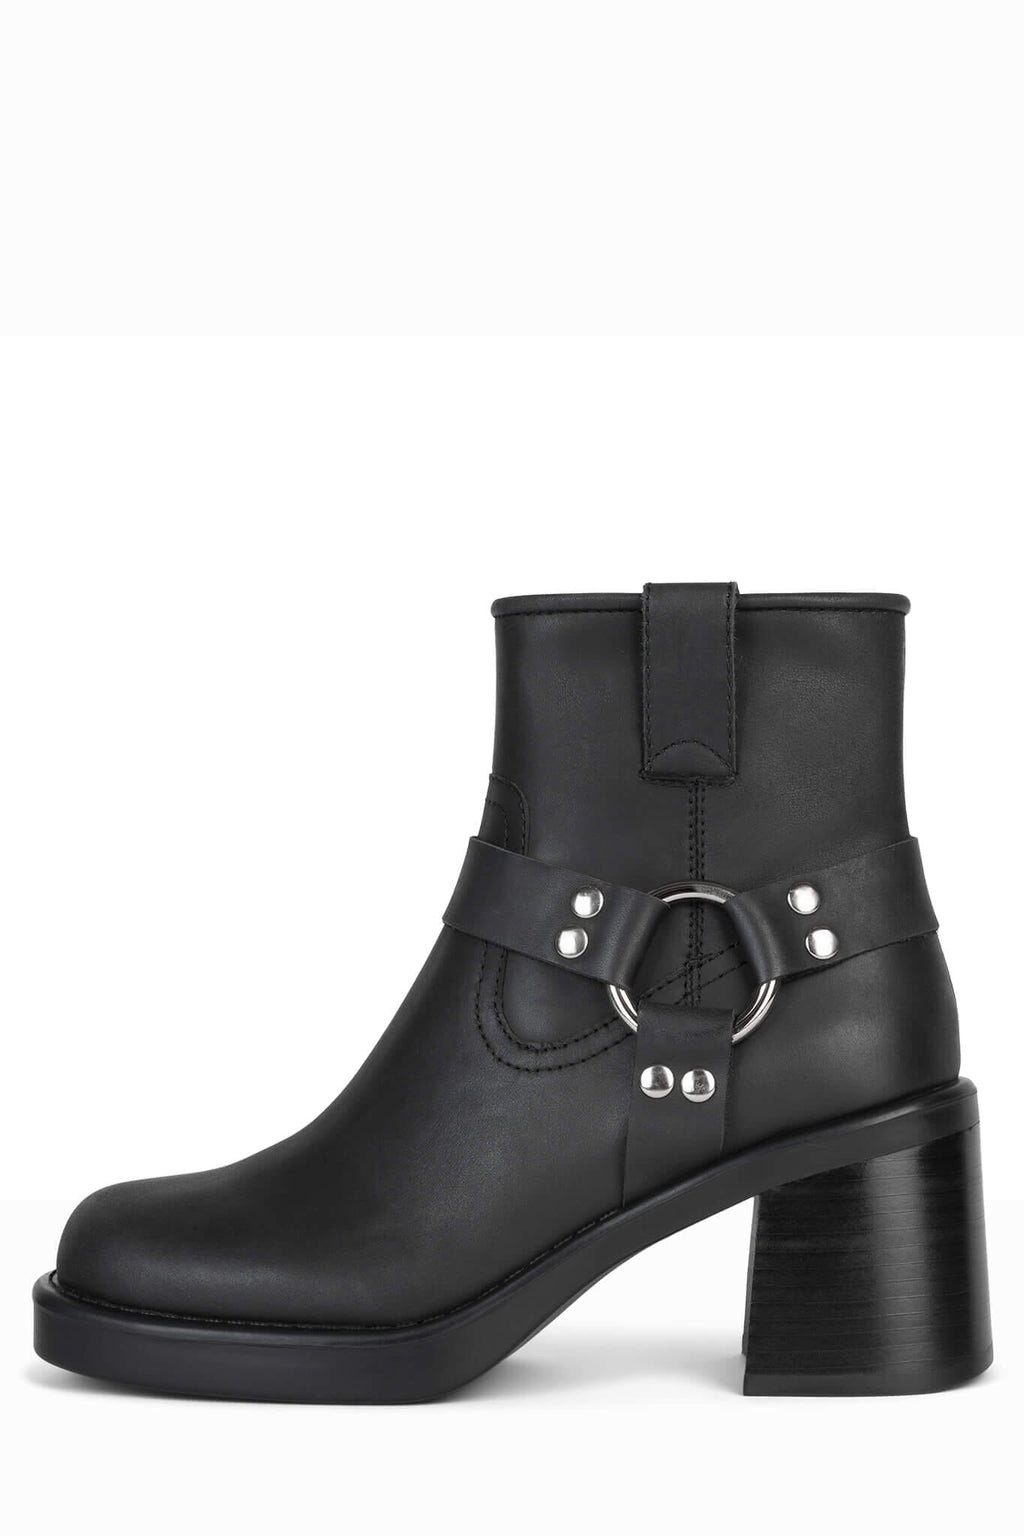 OPERATOR Heeled Boot ST Black Silver 6 